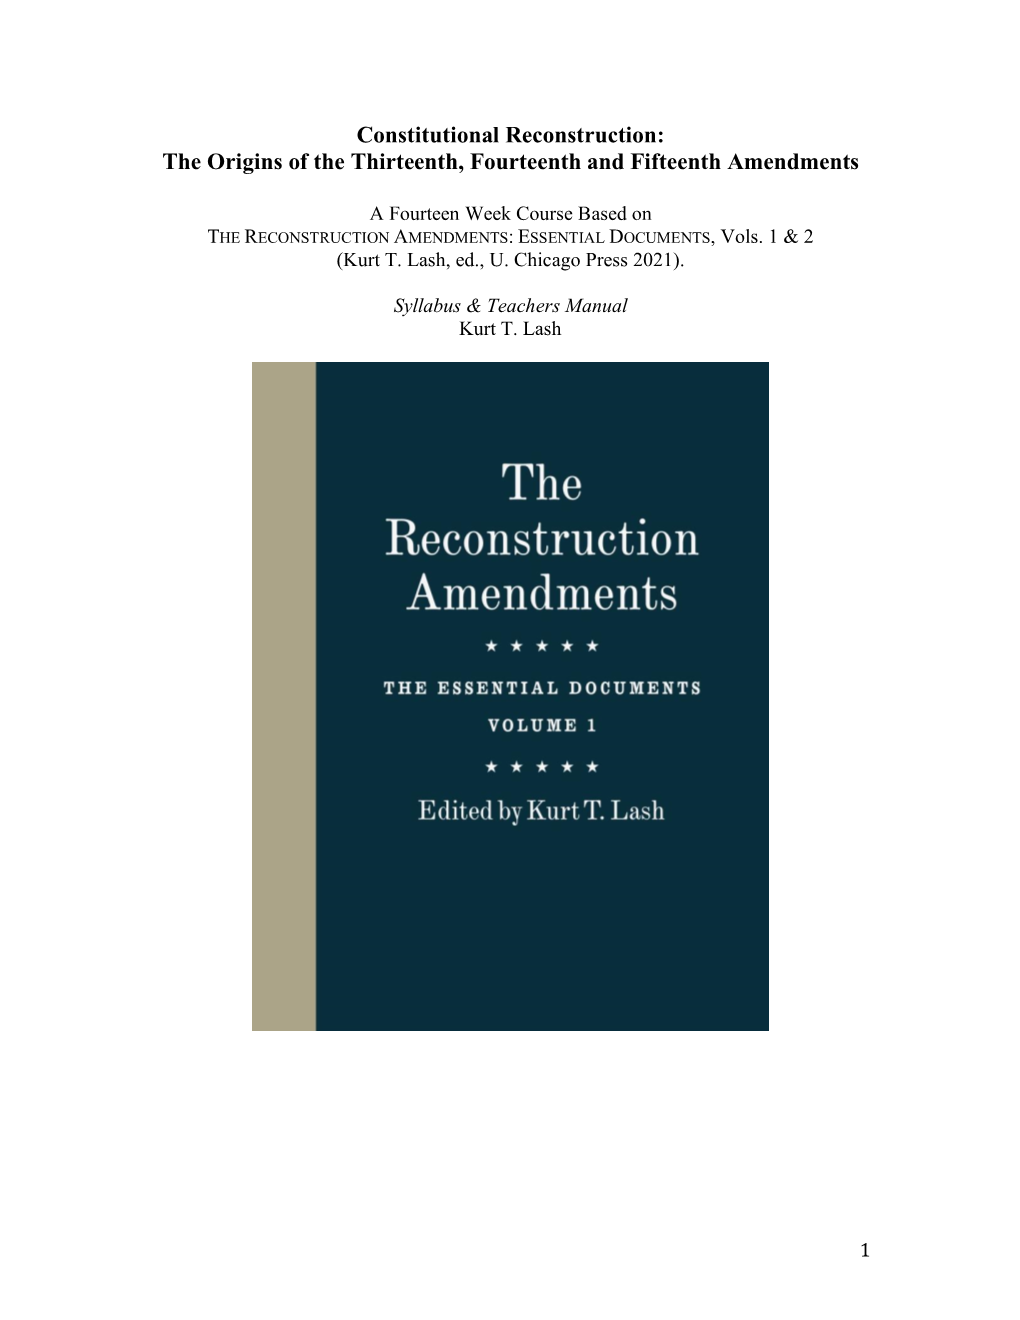 Constitutional Reconstruction: the Origins of the Thirteenth, Fourteenth and Fifteenth Amendments